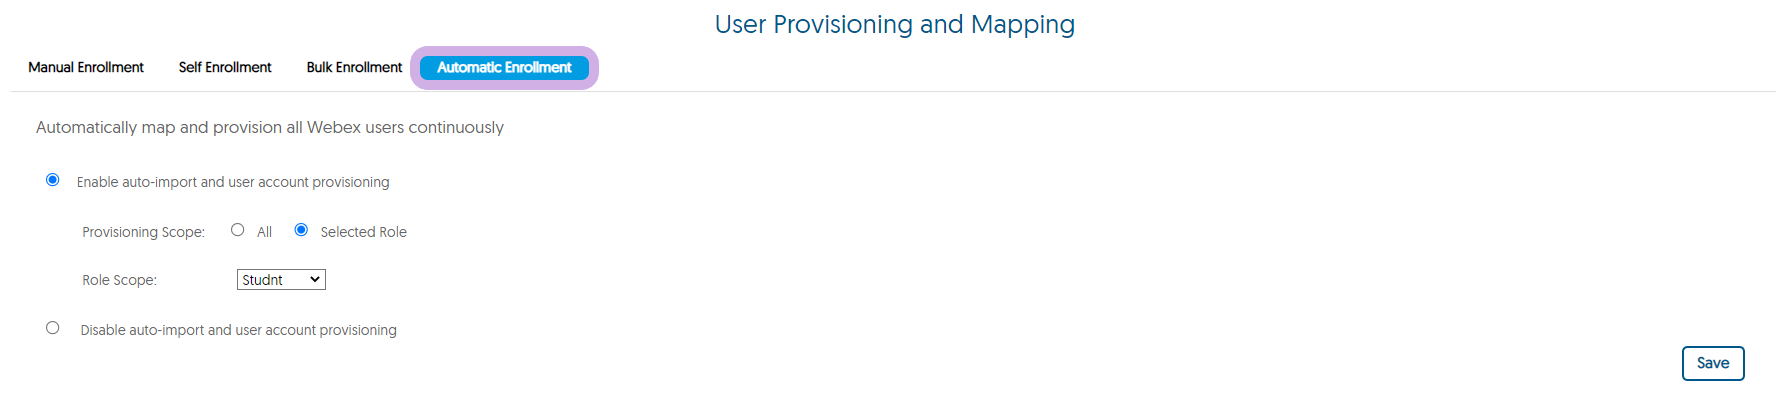 The User Provisioning and Mapping panel for Webex with Automatic Enrollment selected.